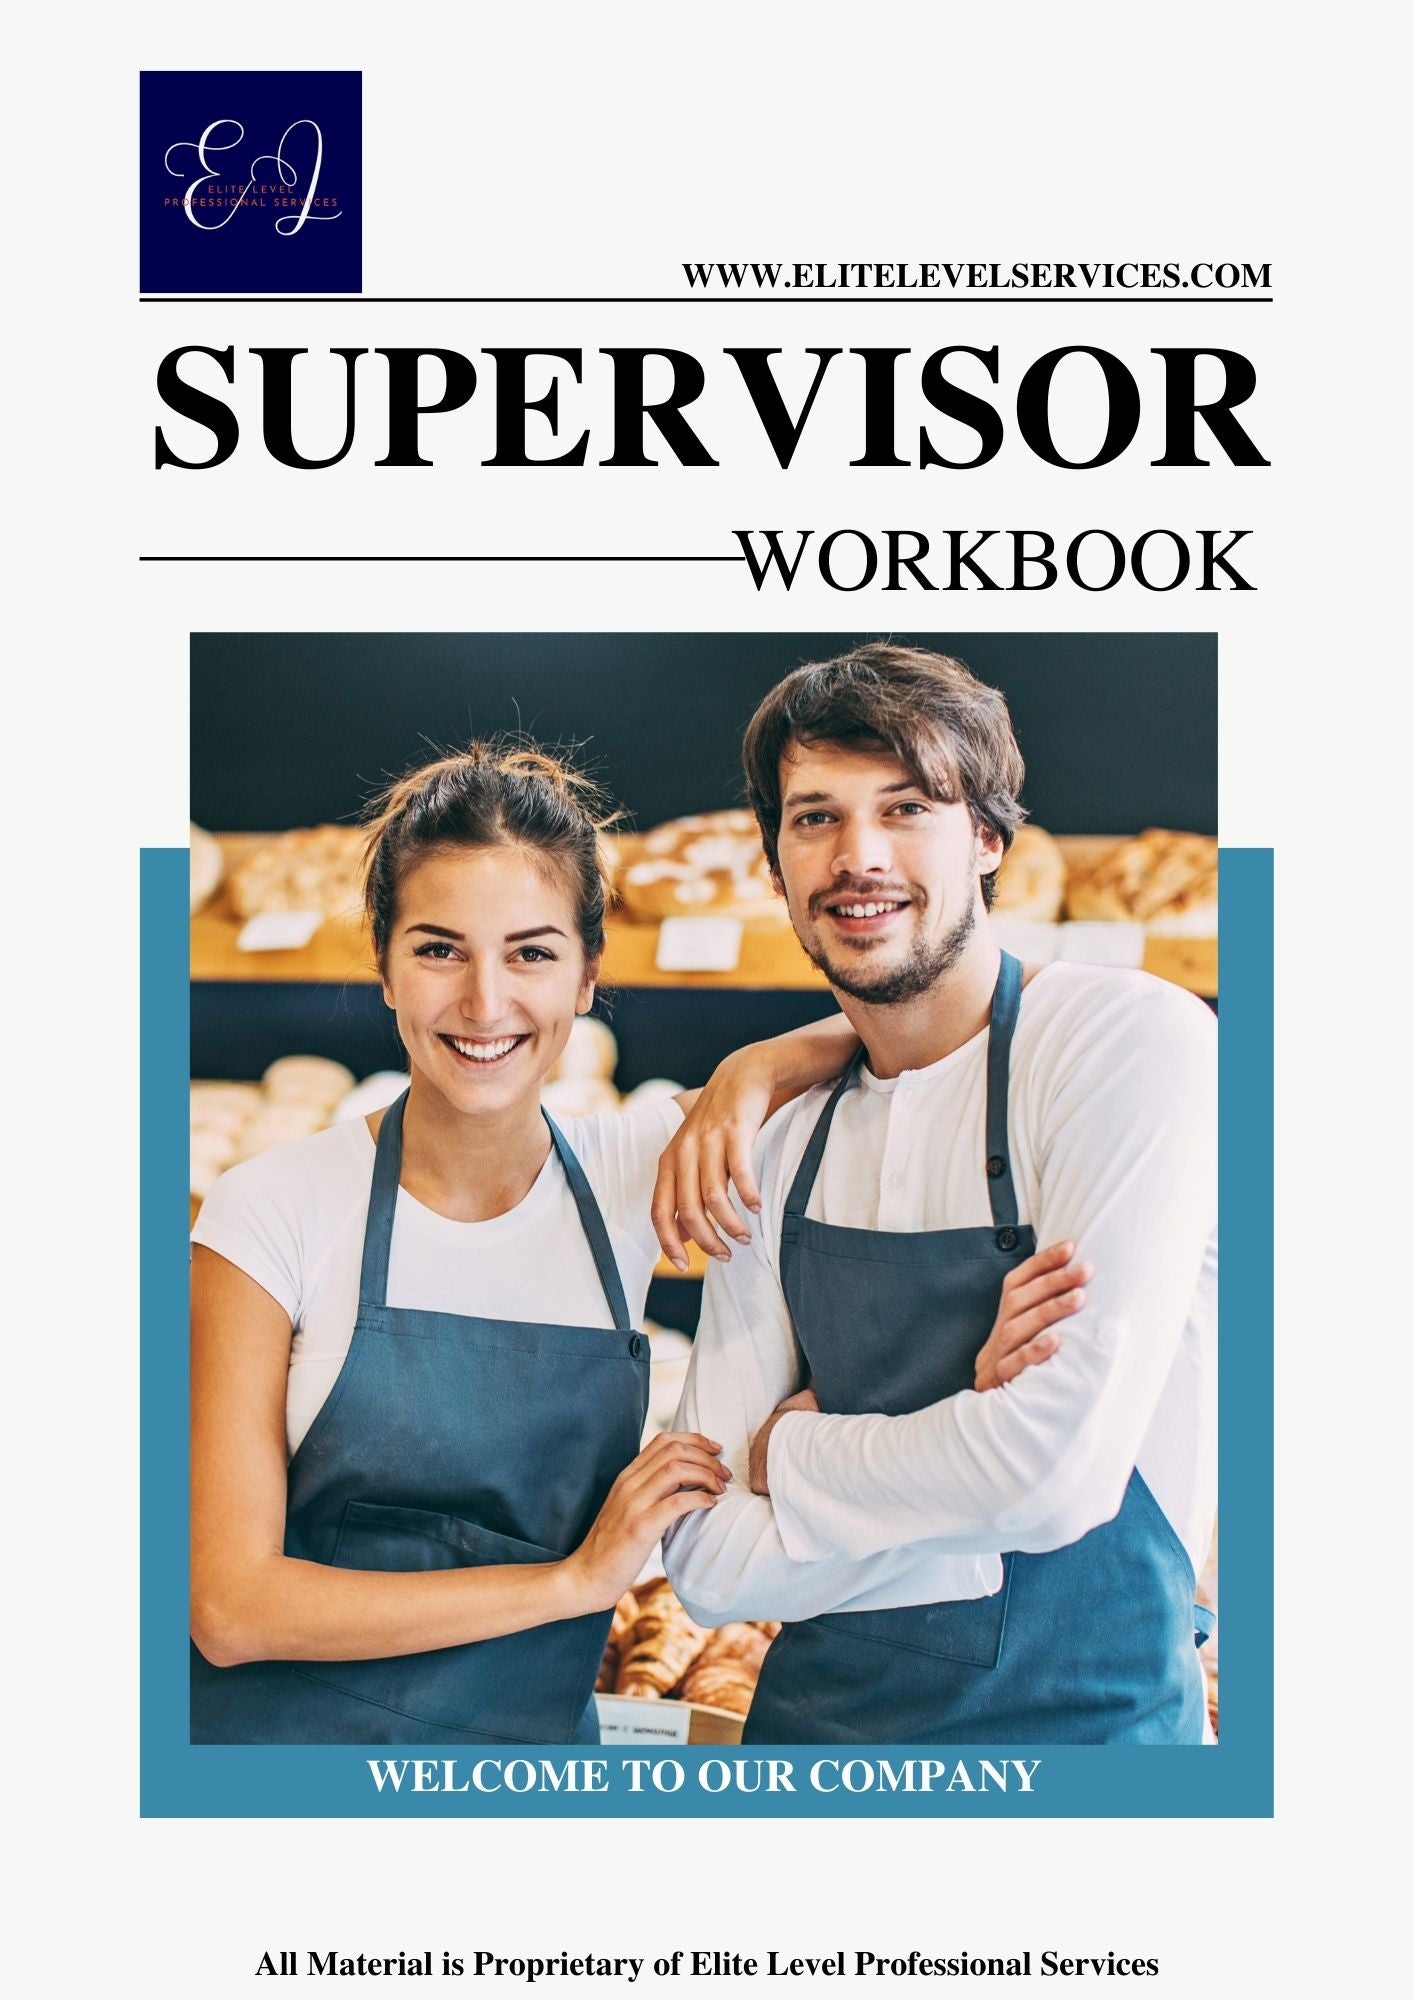 How to Supervise Employees Workbook